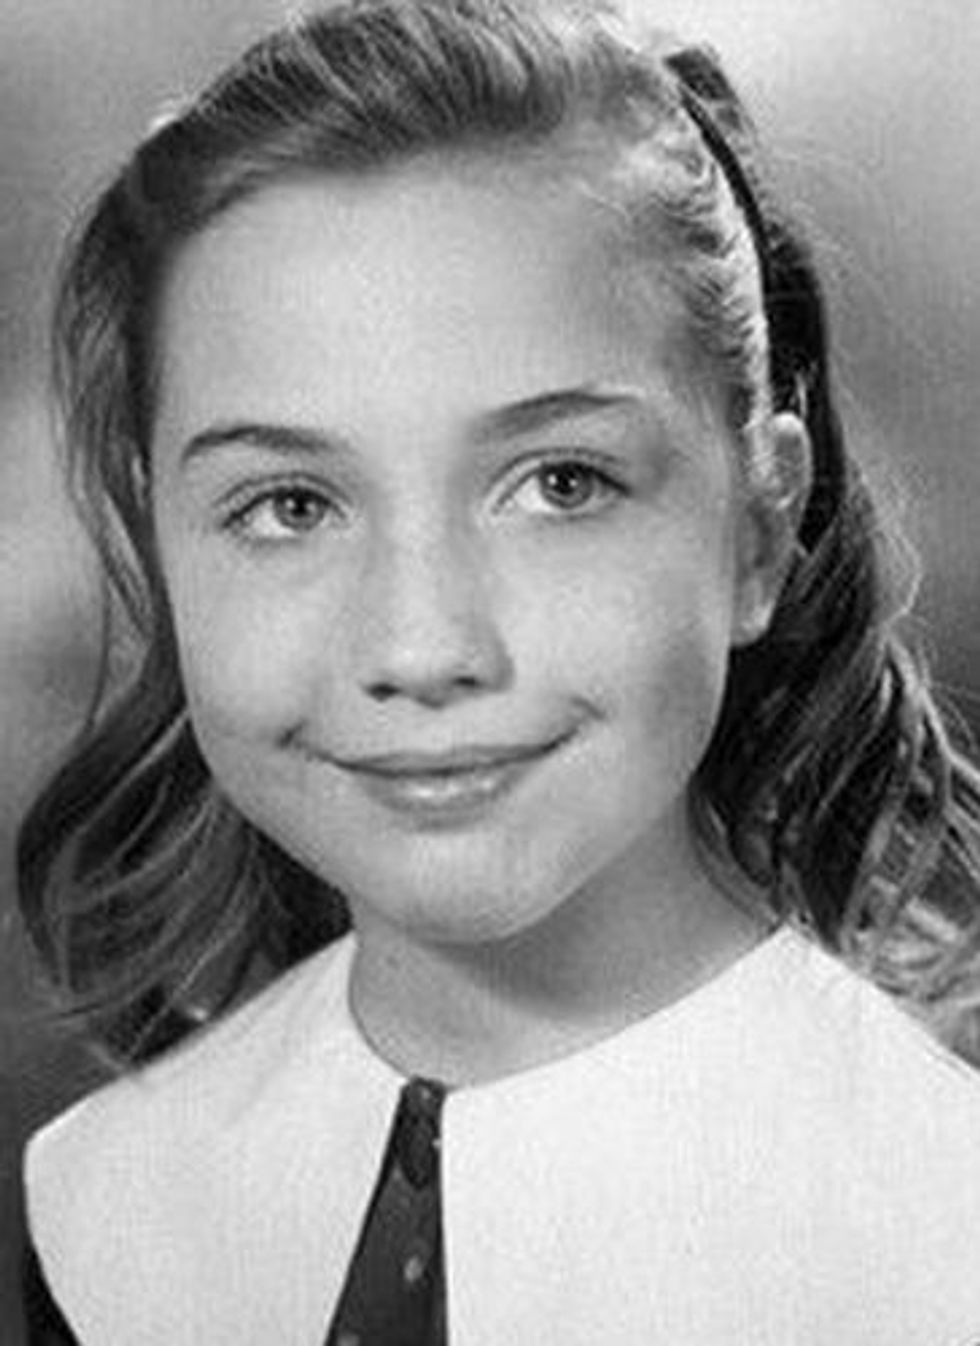 Little Girl Hillary Clinton Punched Kid In Nose For Endangering Baby Bunnies. What A B!